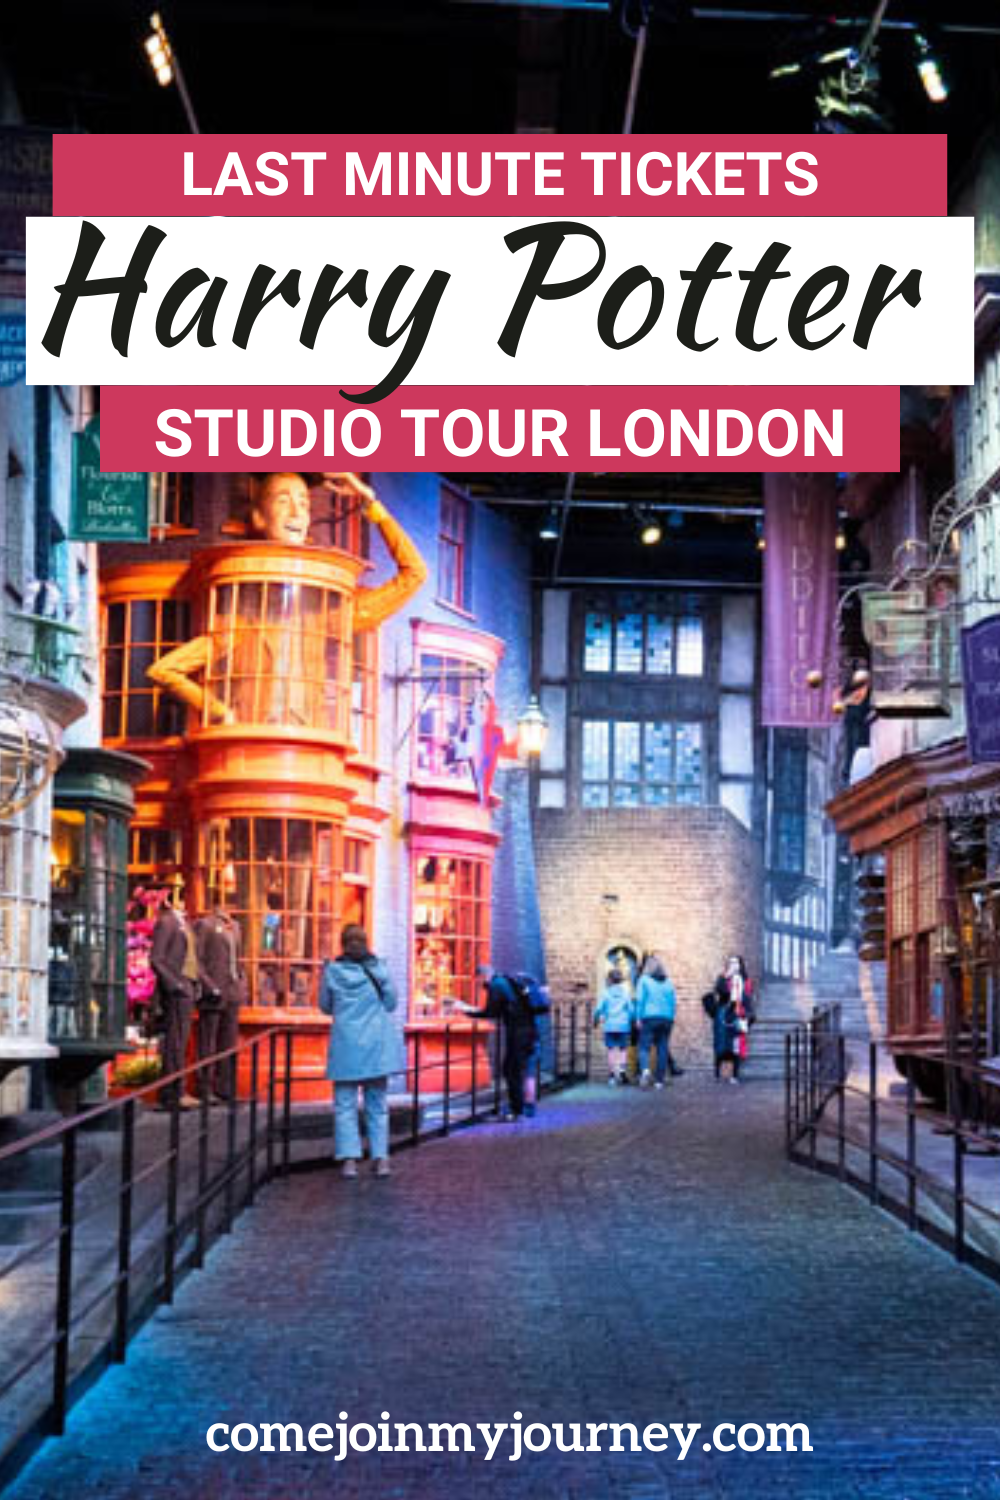 How to Get Last Minute Tickets to Harry Potter Studio Tour When Tickets Are Sold Out